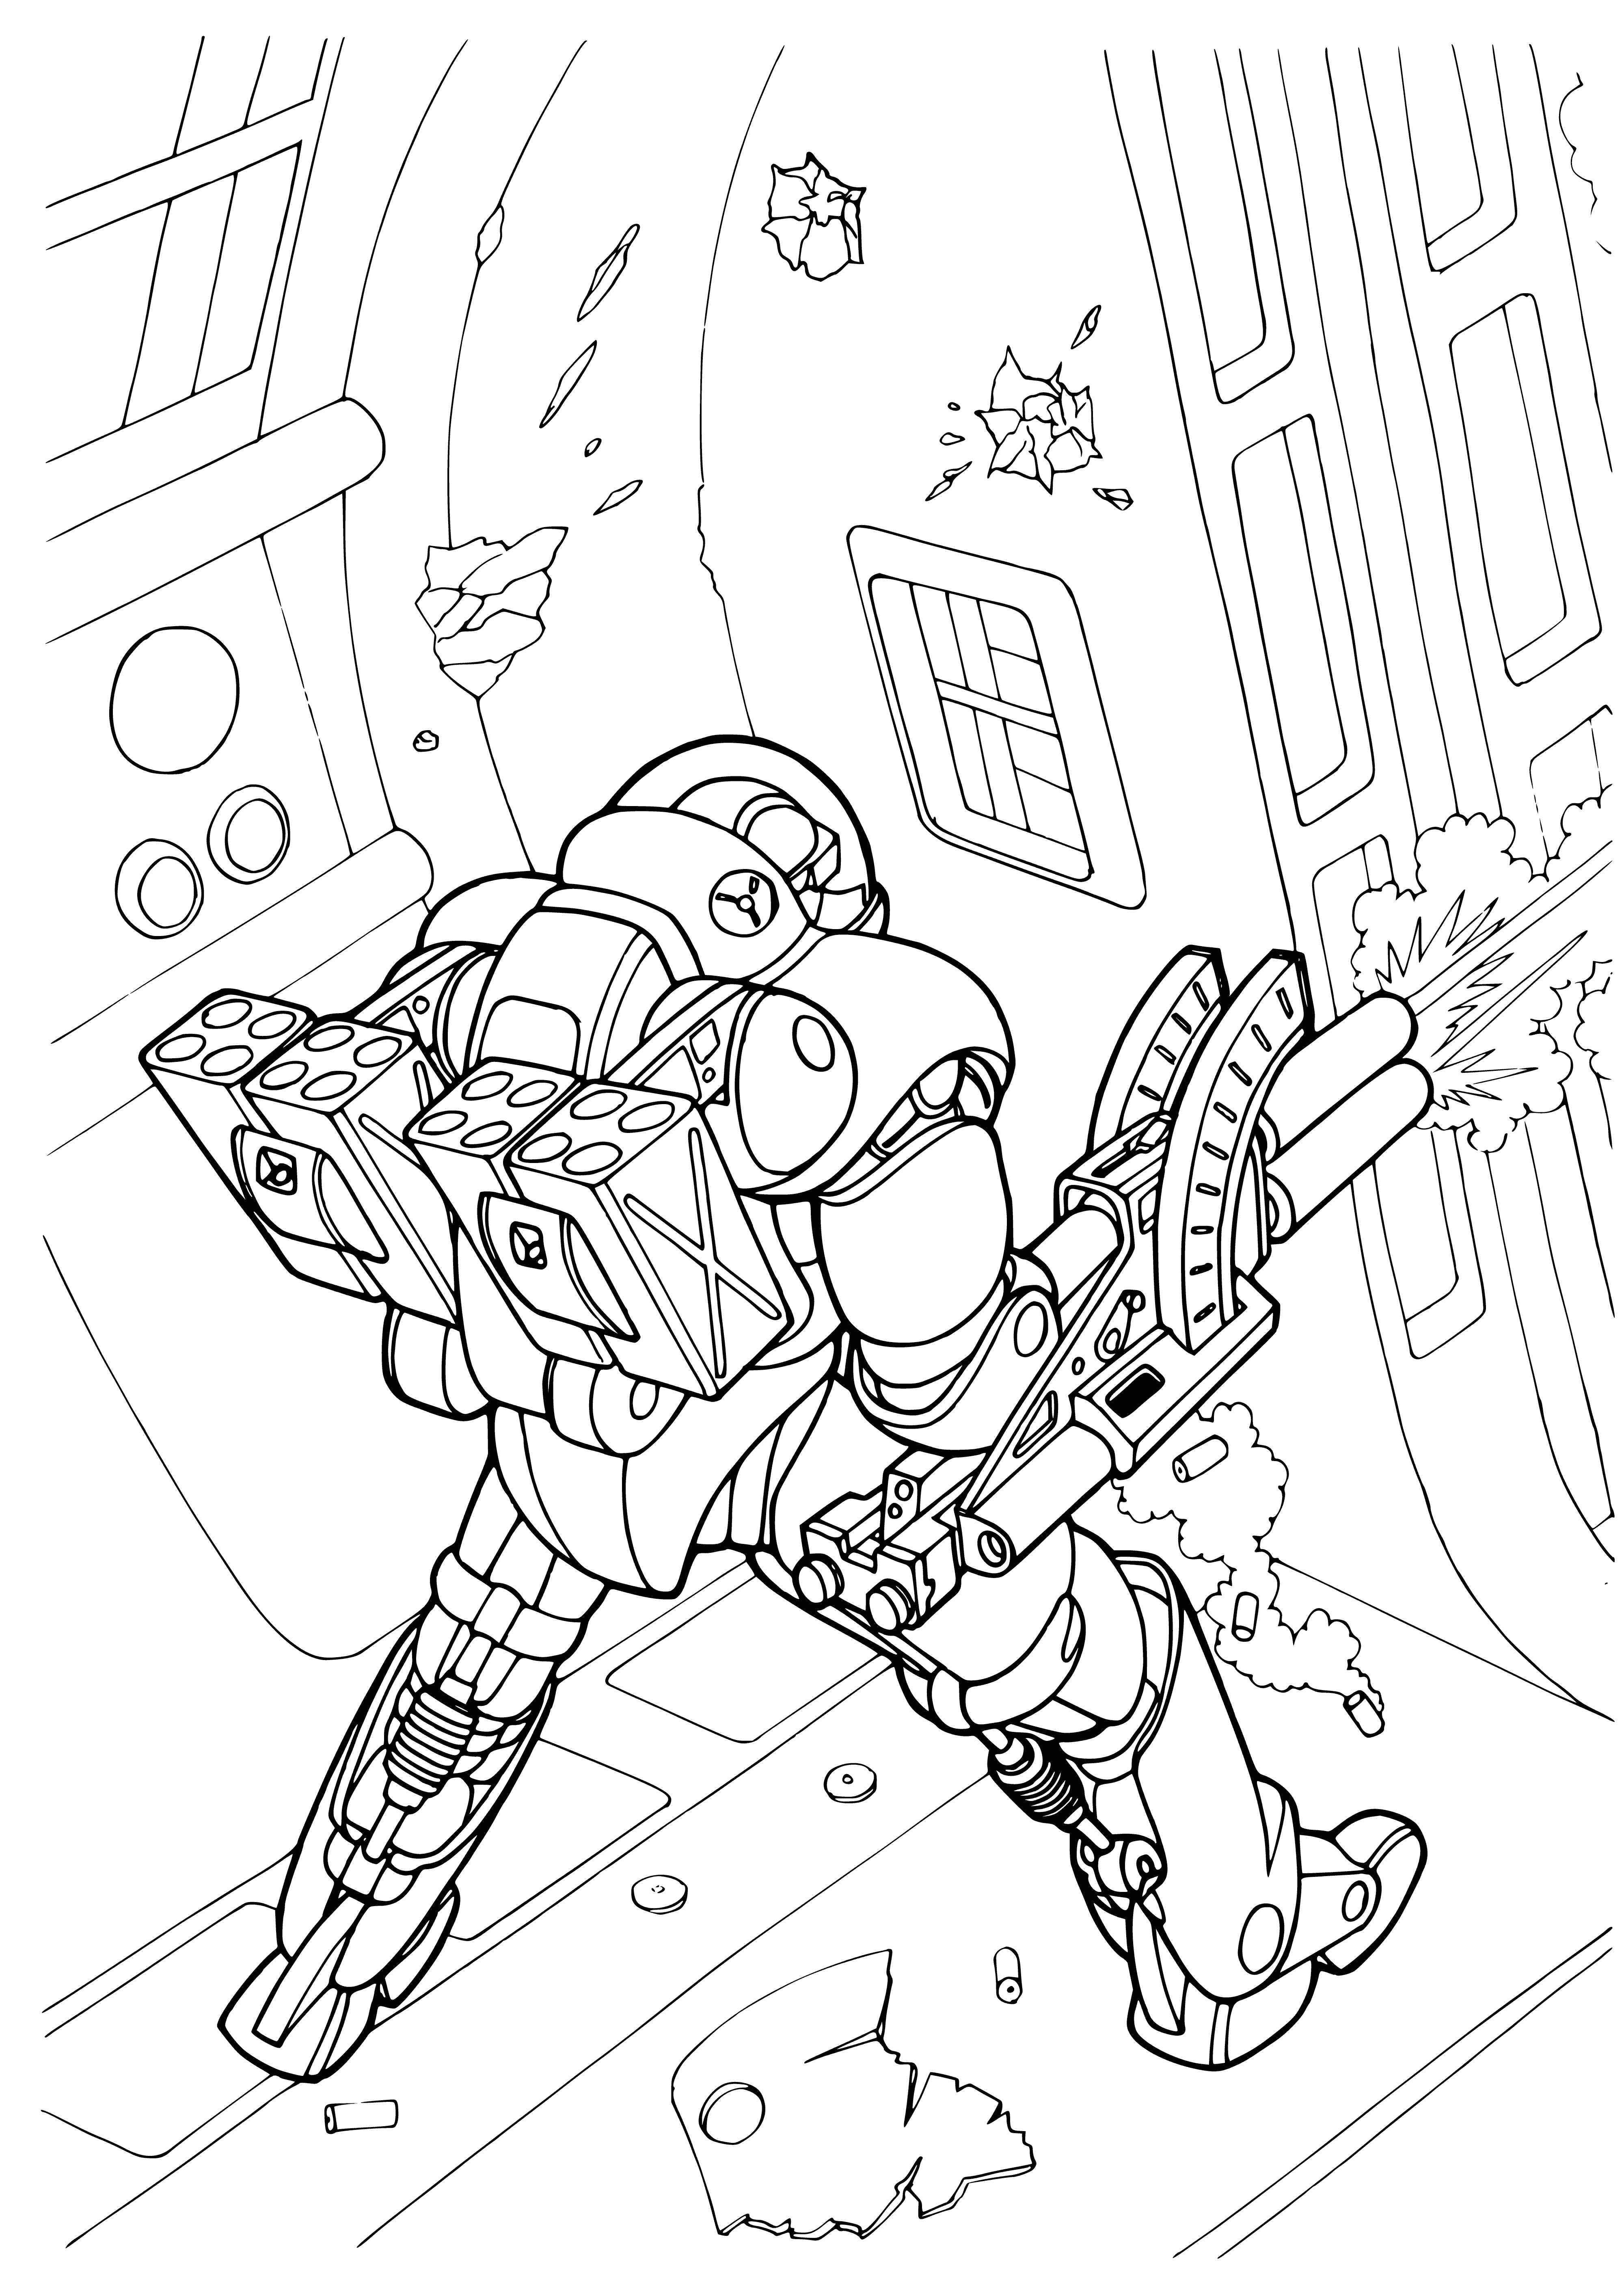 coloring page: In future, soldiers in space-suits fight wars with laser guns for universal control.